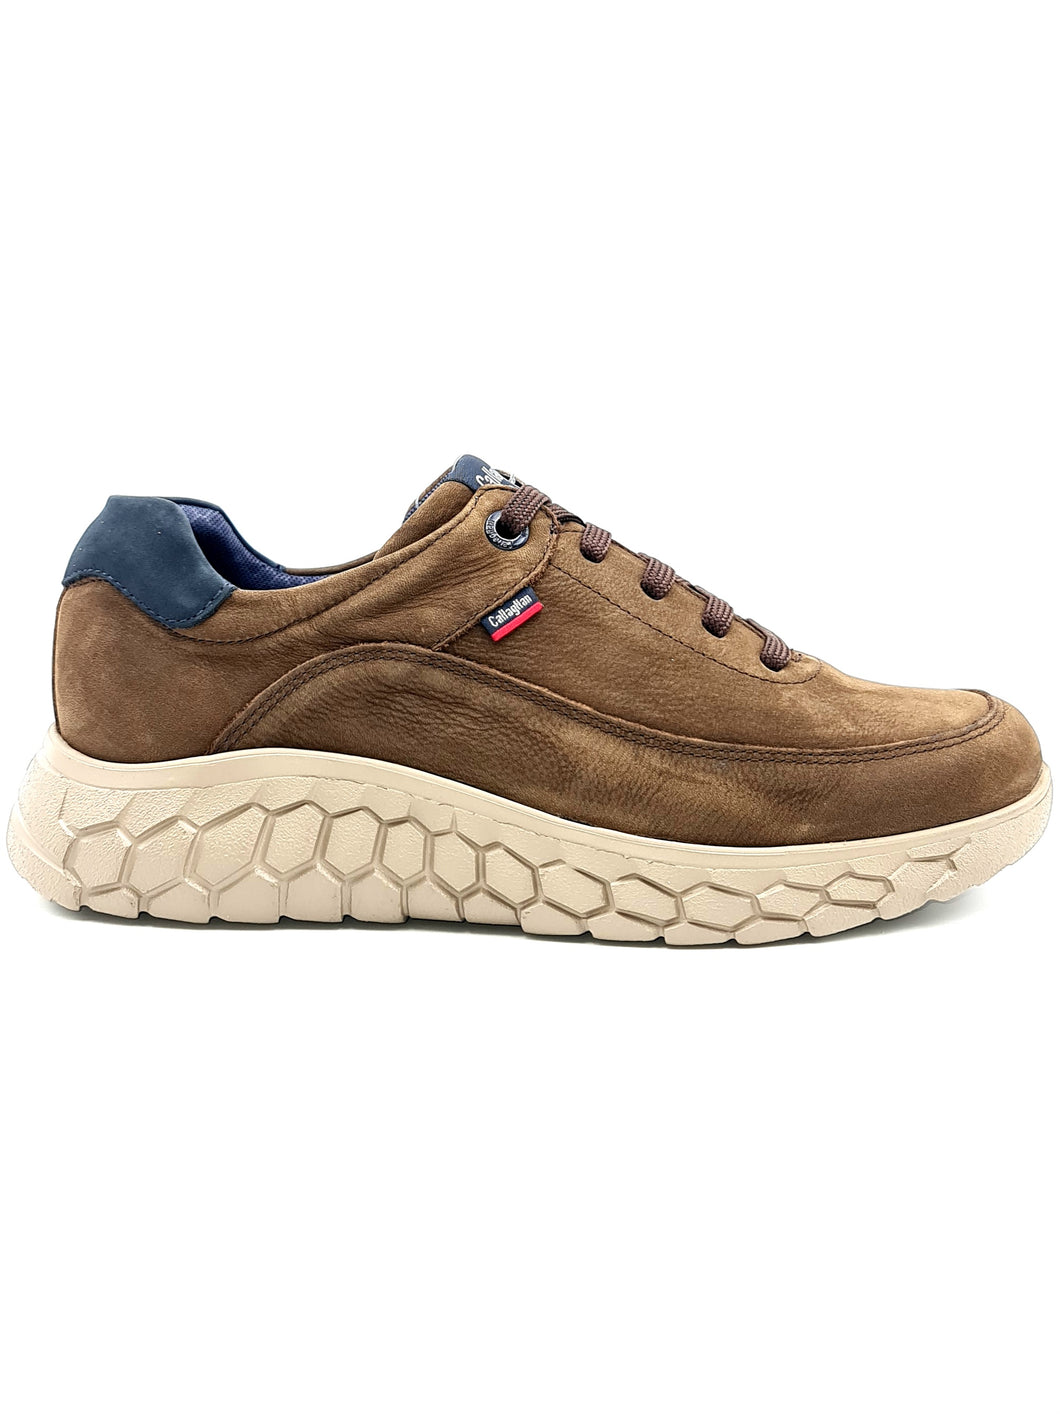 CALLAGHAN Sneakers pelle cuoio P71